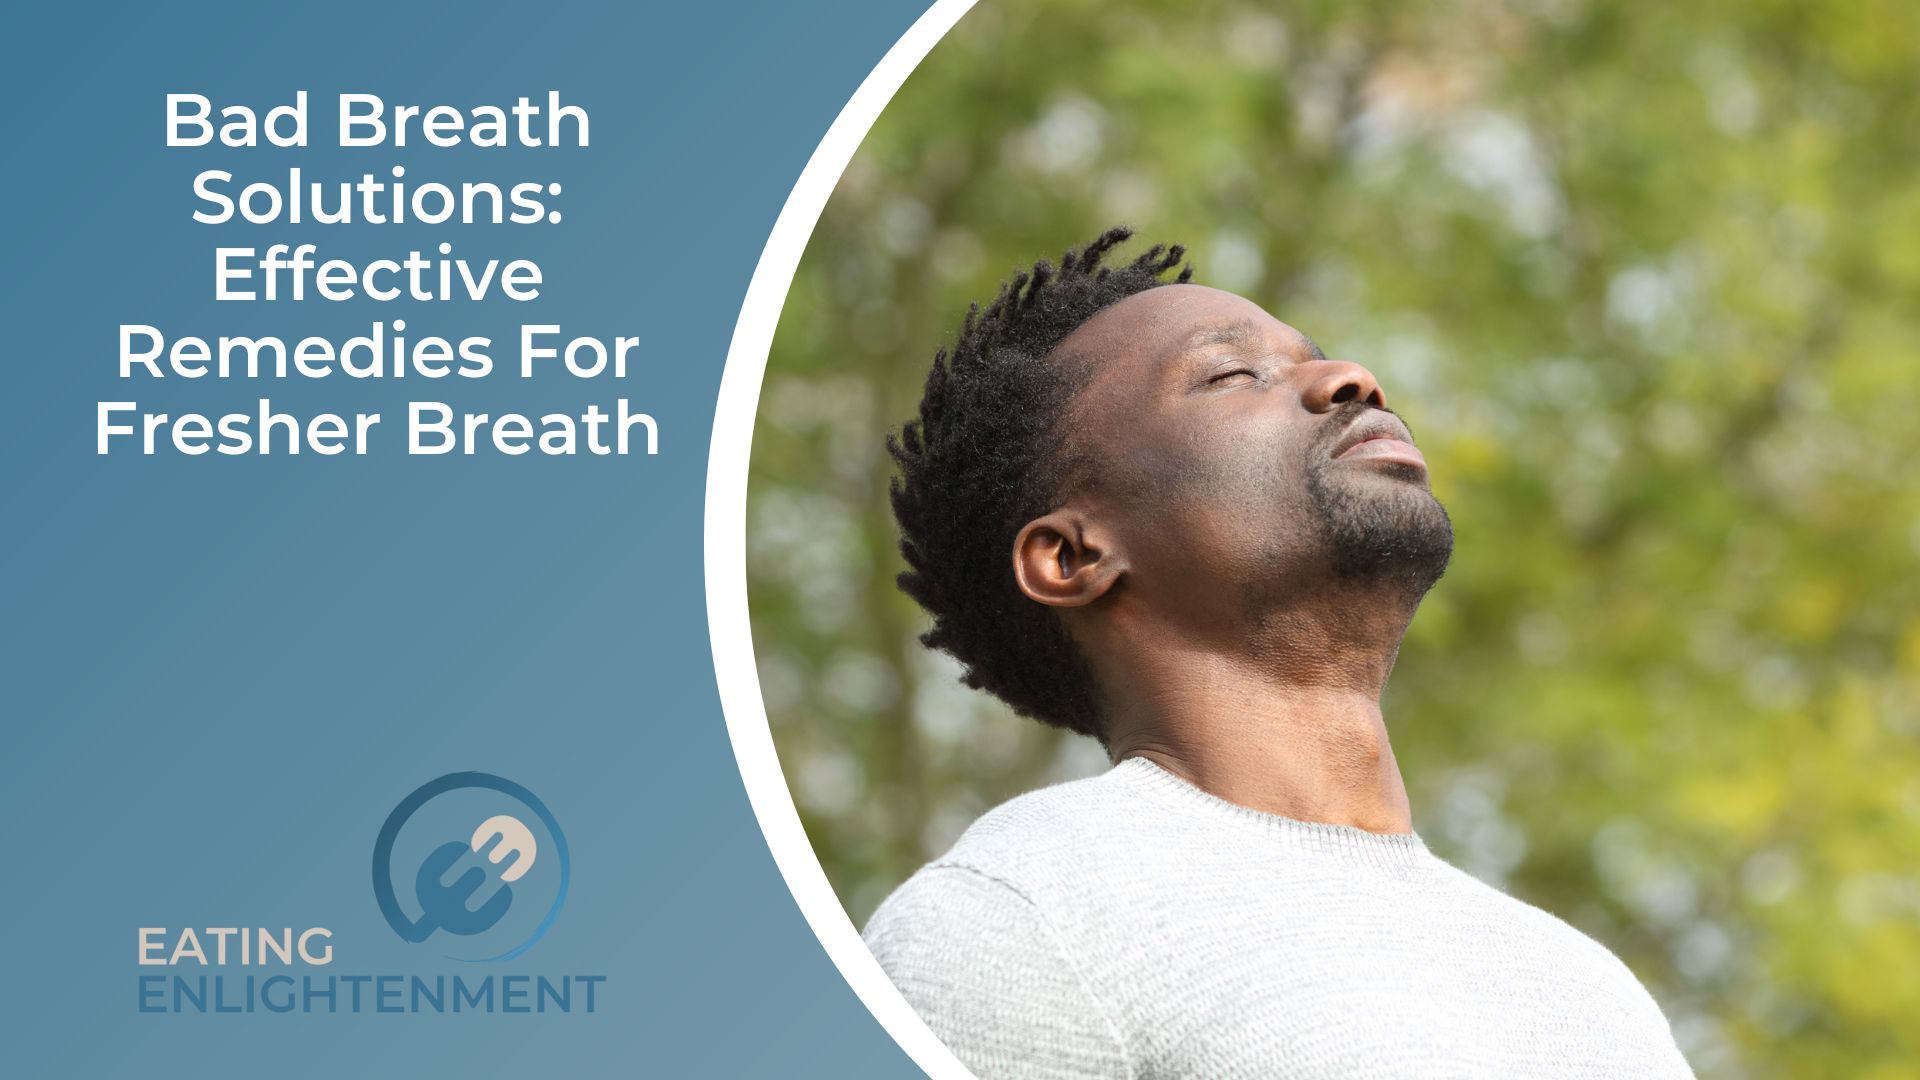 Bad Breath Solutions Effective Remedies For Fresher Breath